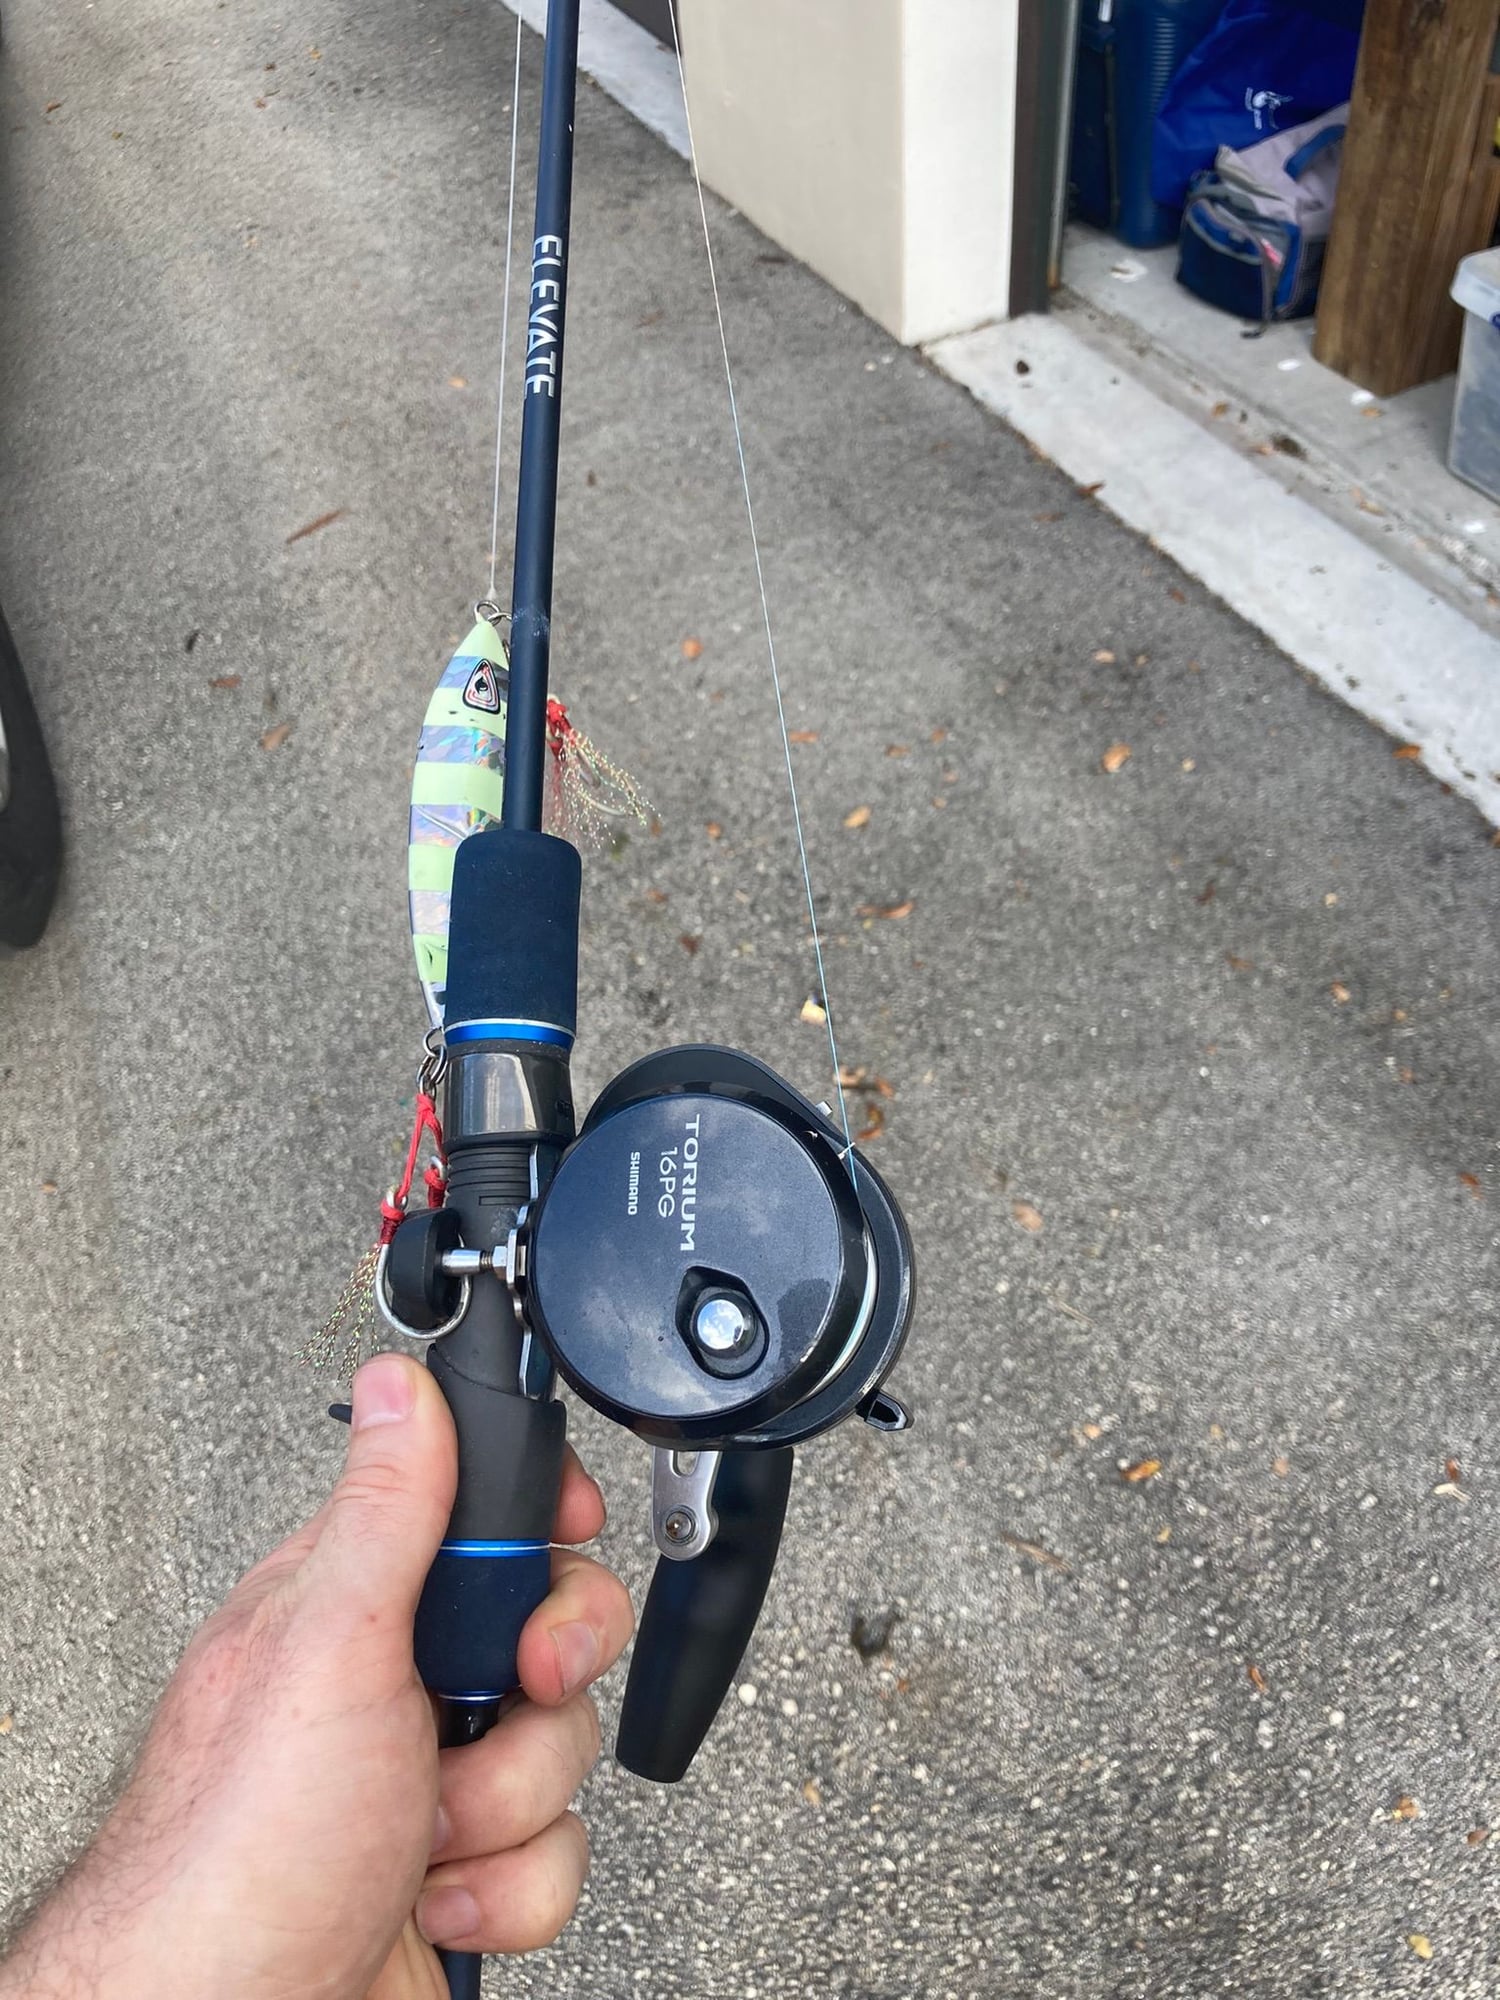 Selling all saltwater fishing gear - The Hull Truth - Boating and